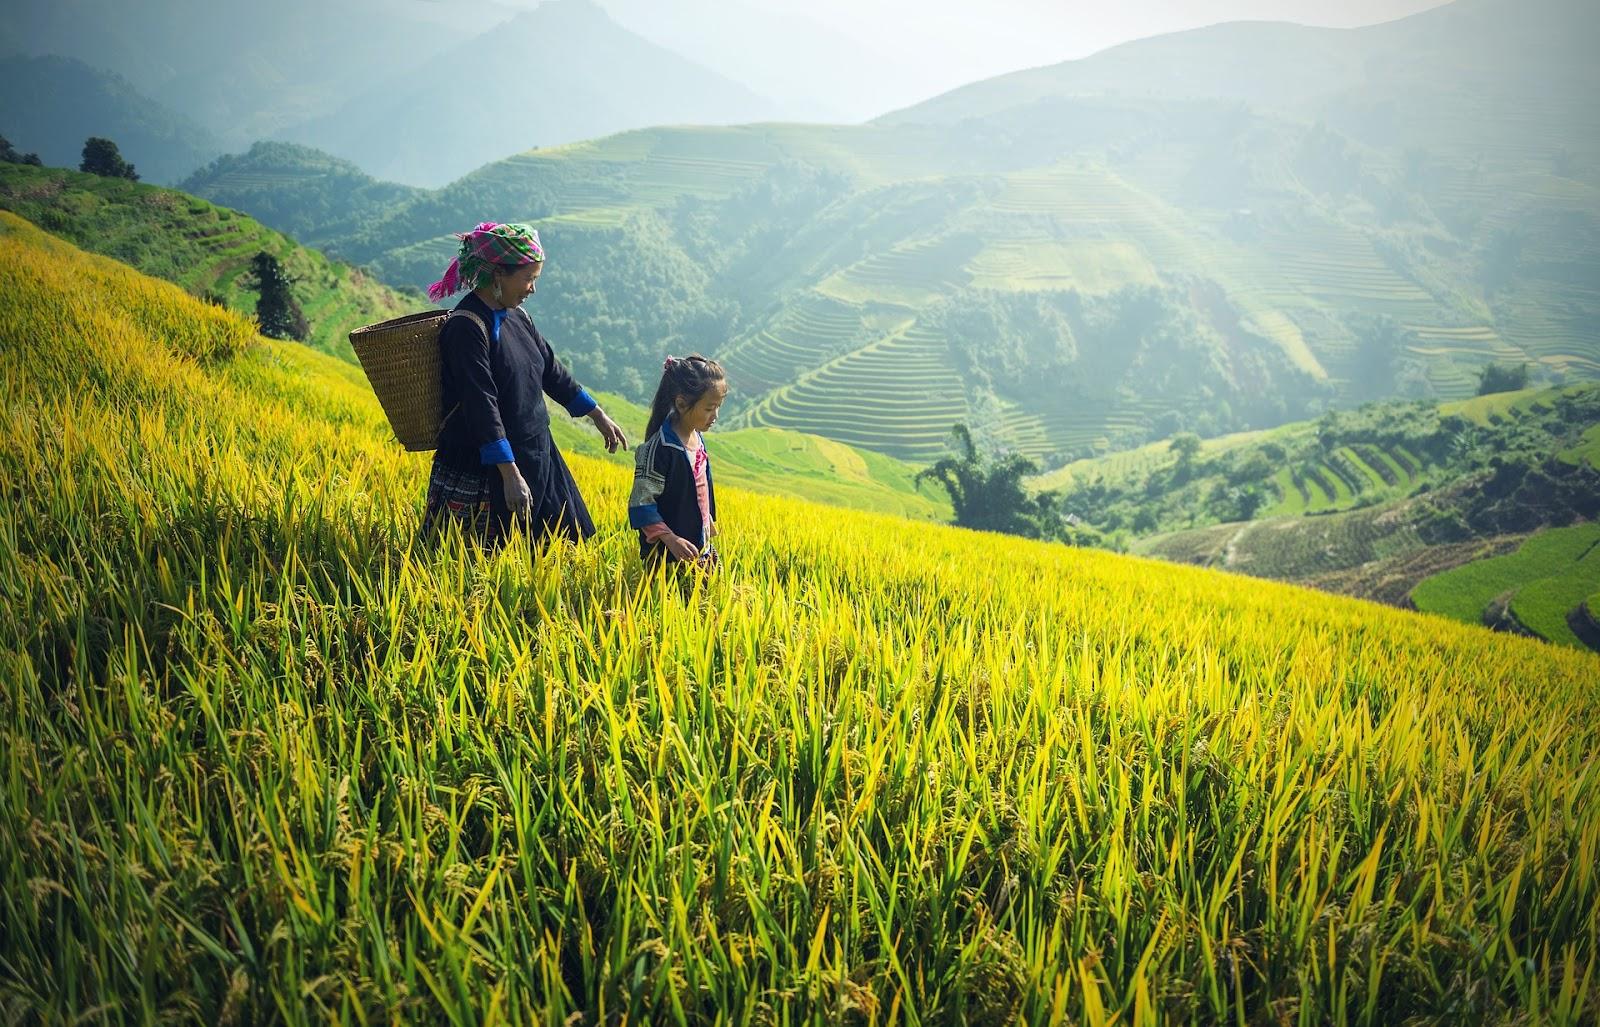 Mother and daughter walking through a rice paddy field in Malaysia.